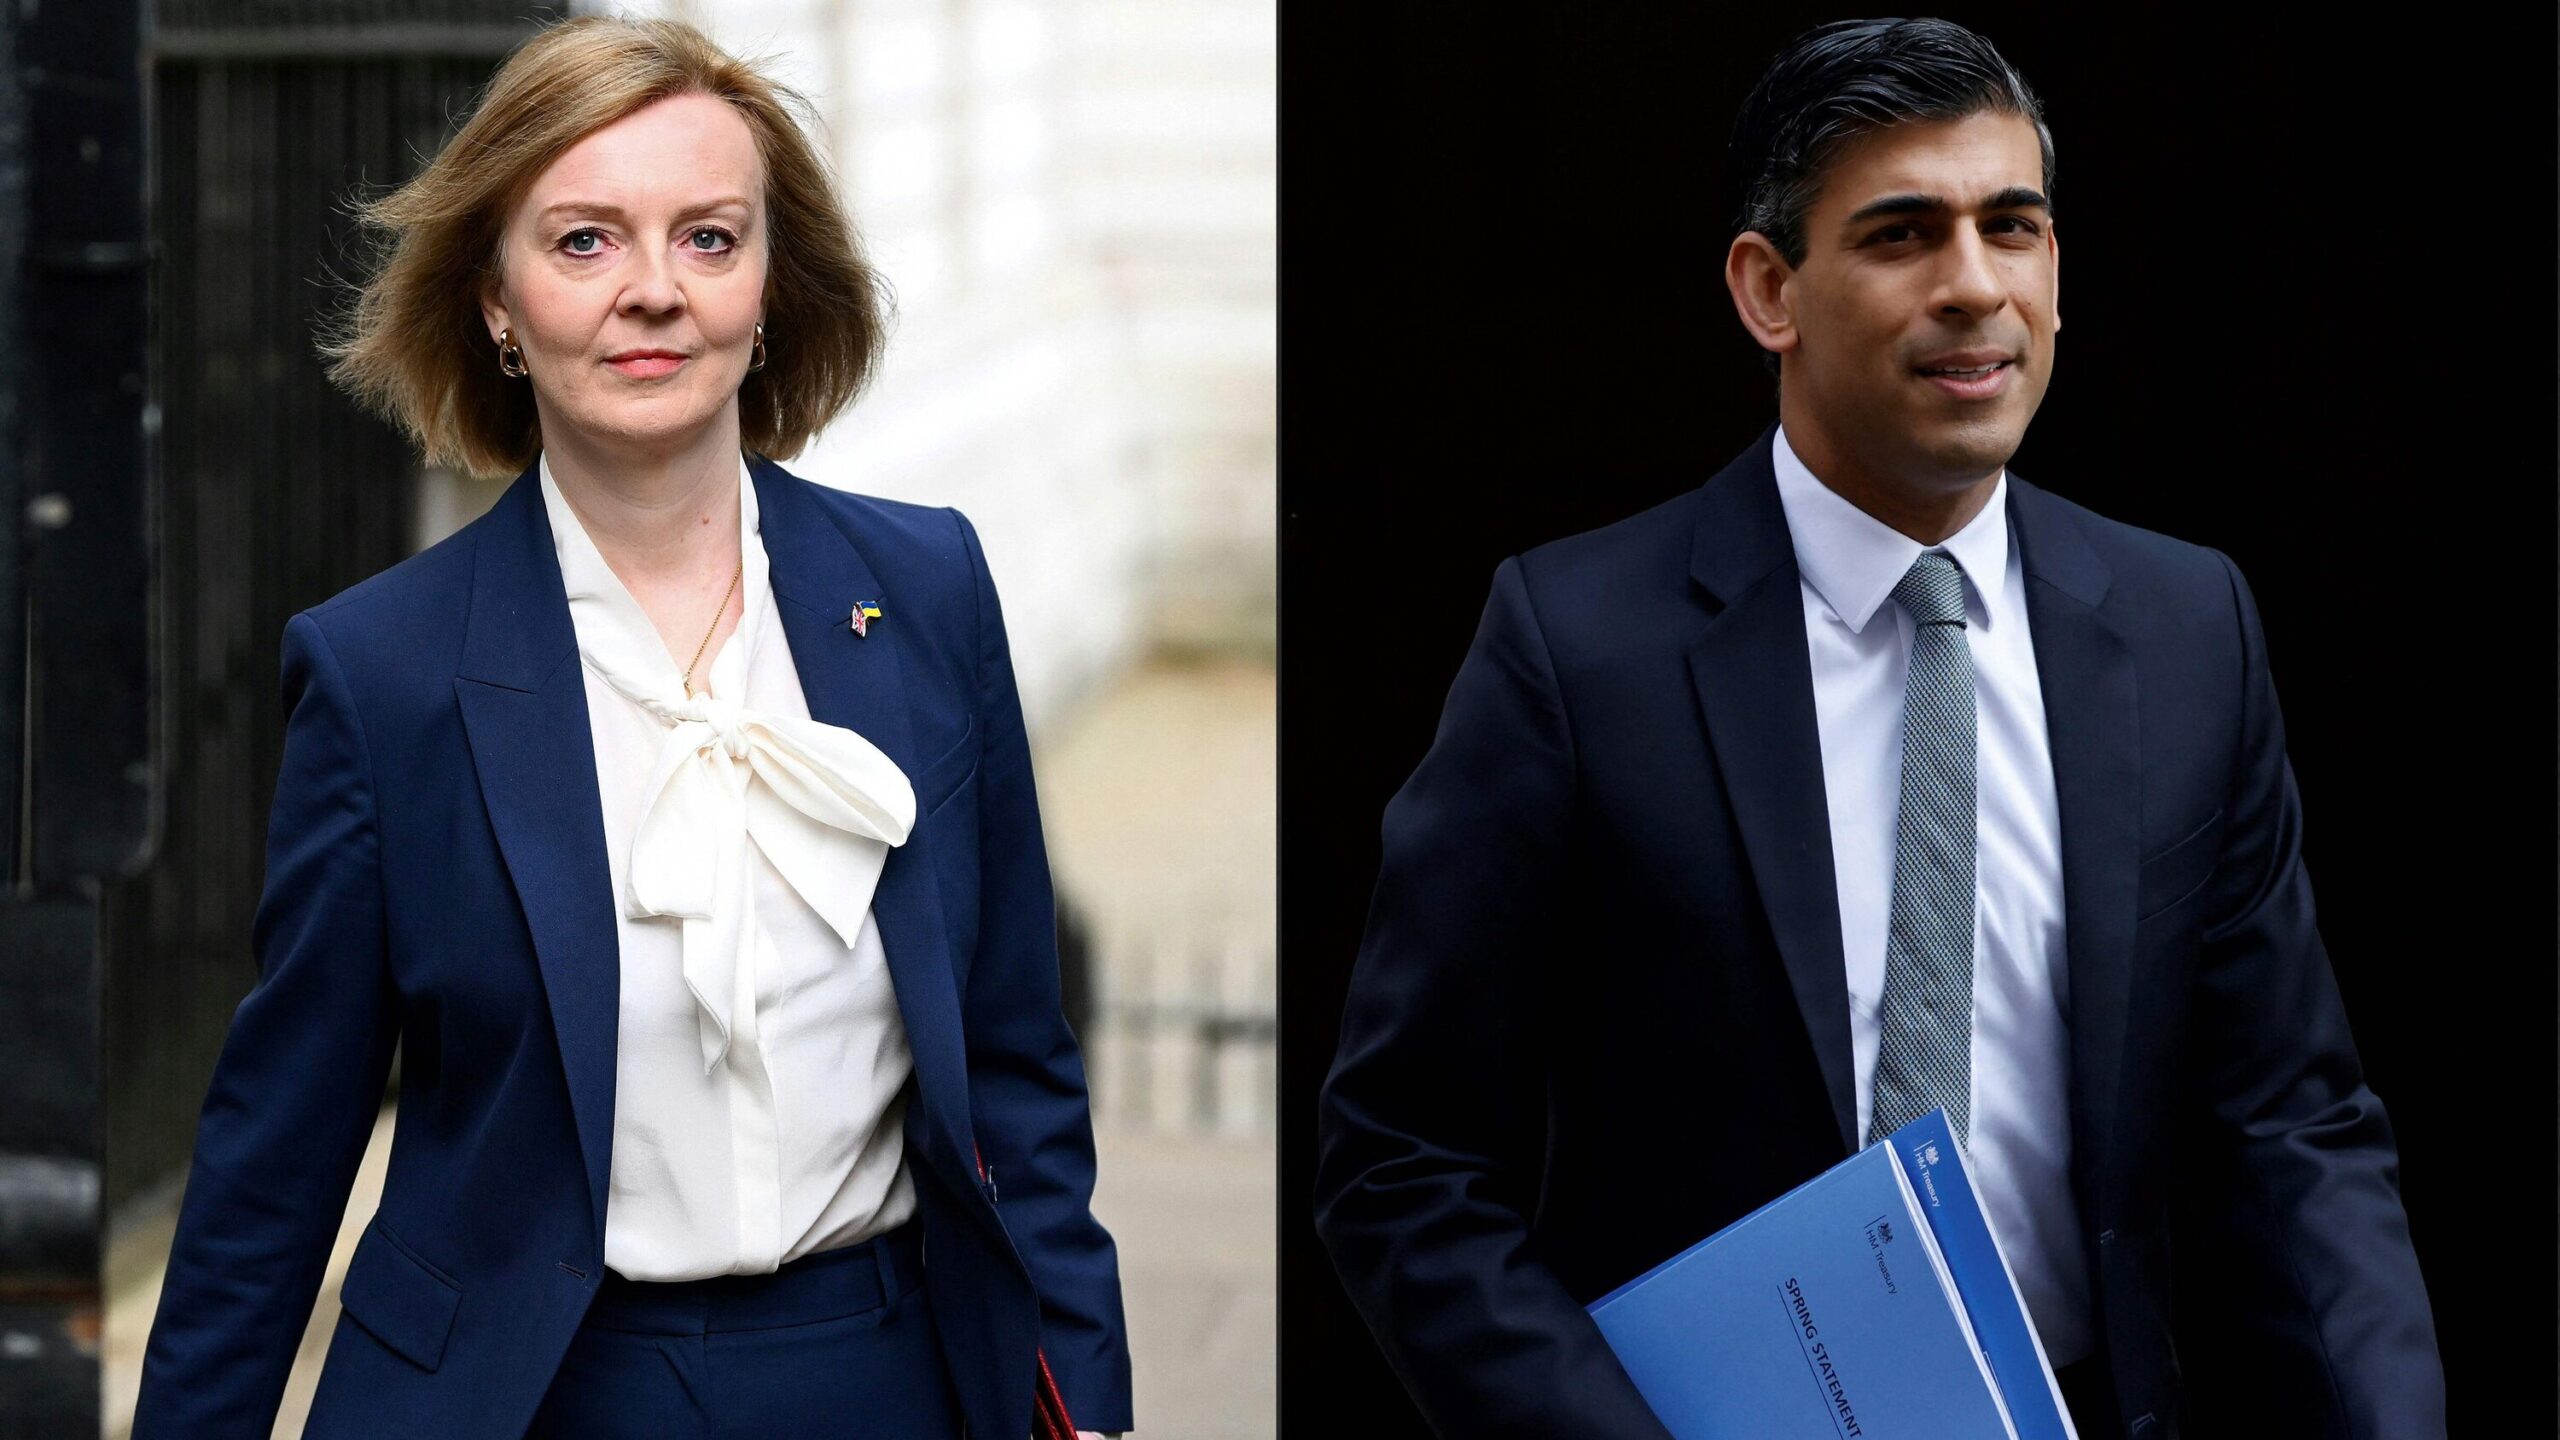 Final Two In The Next UK Prime Minister Race